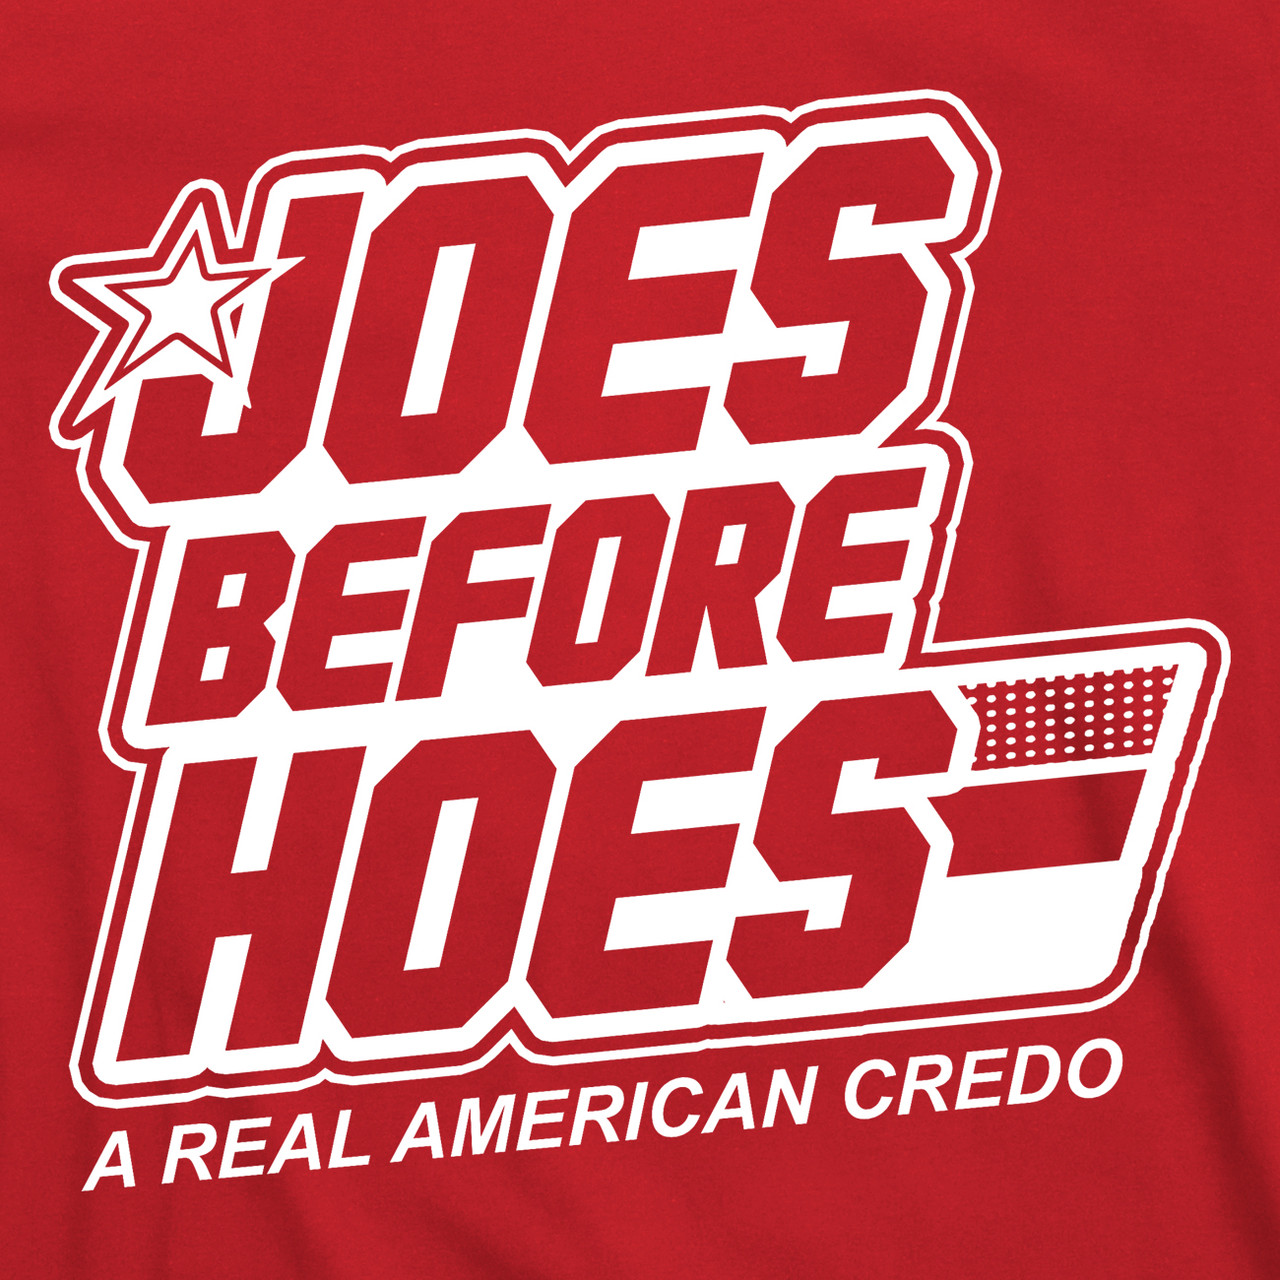 Stros Before Hoes Shirt